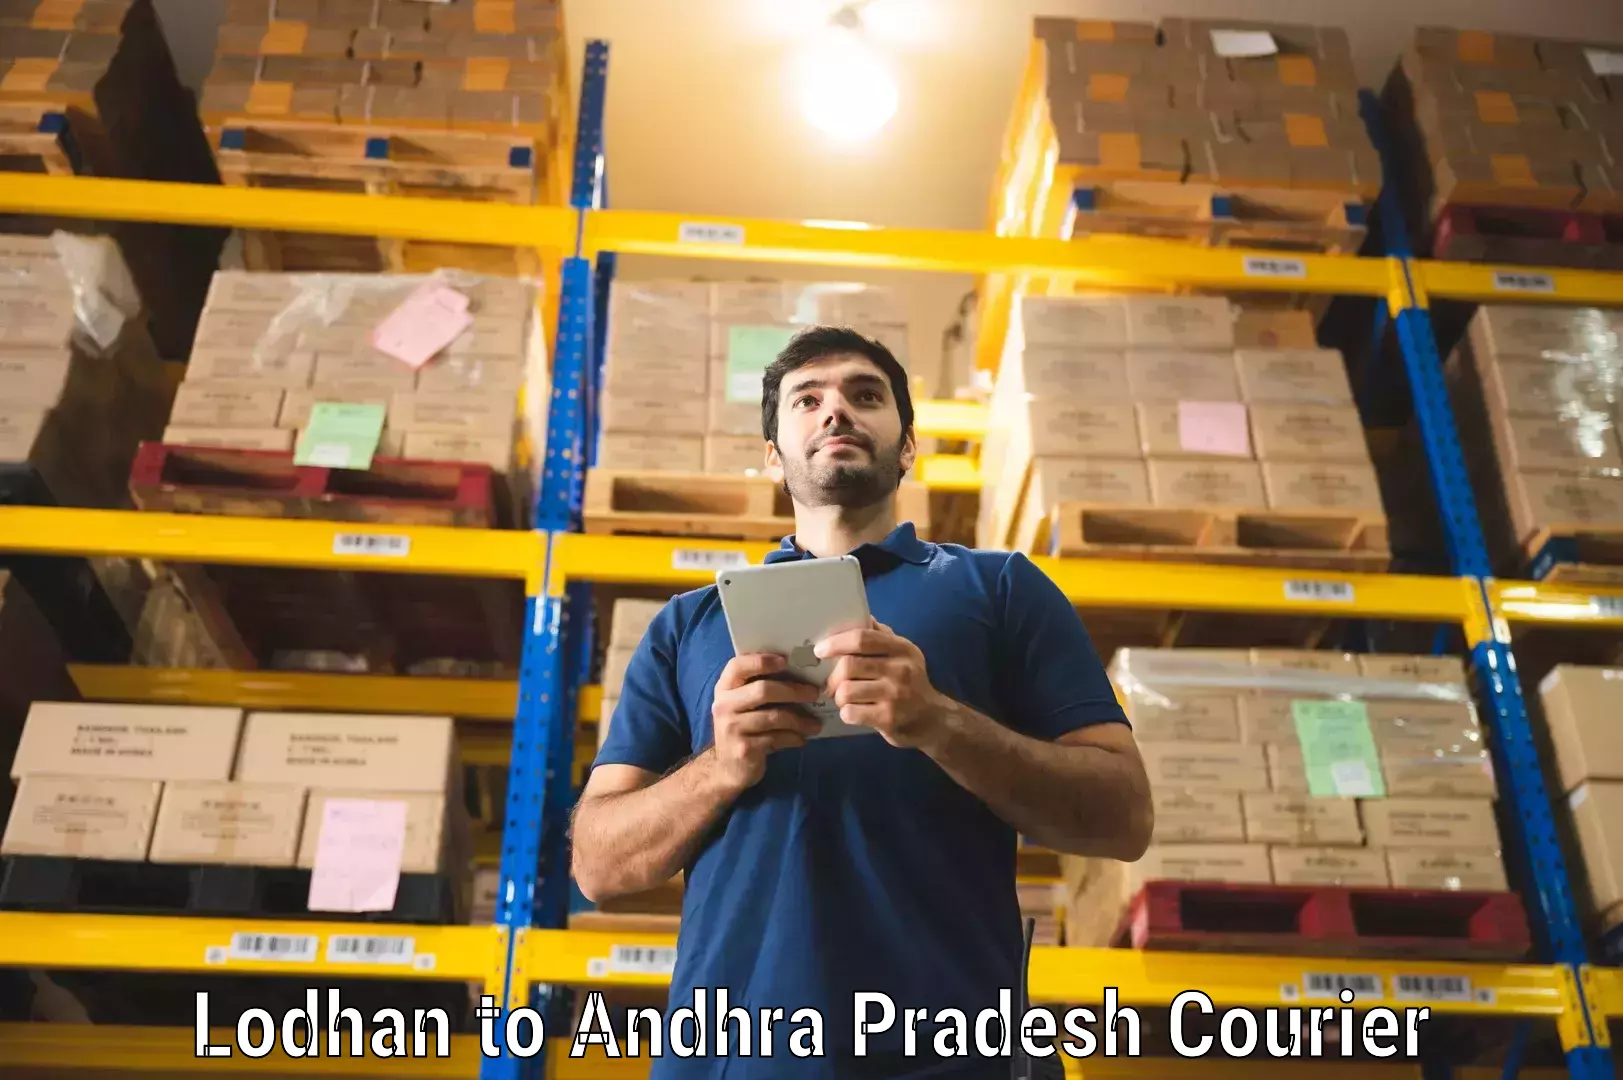 Easy access courier services Lodhan to Andhra Pradesh